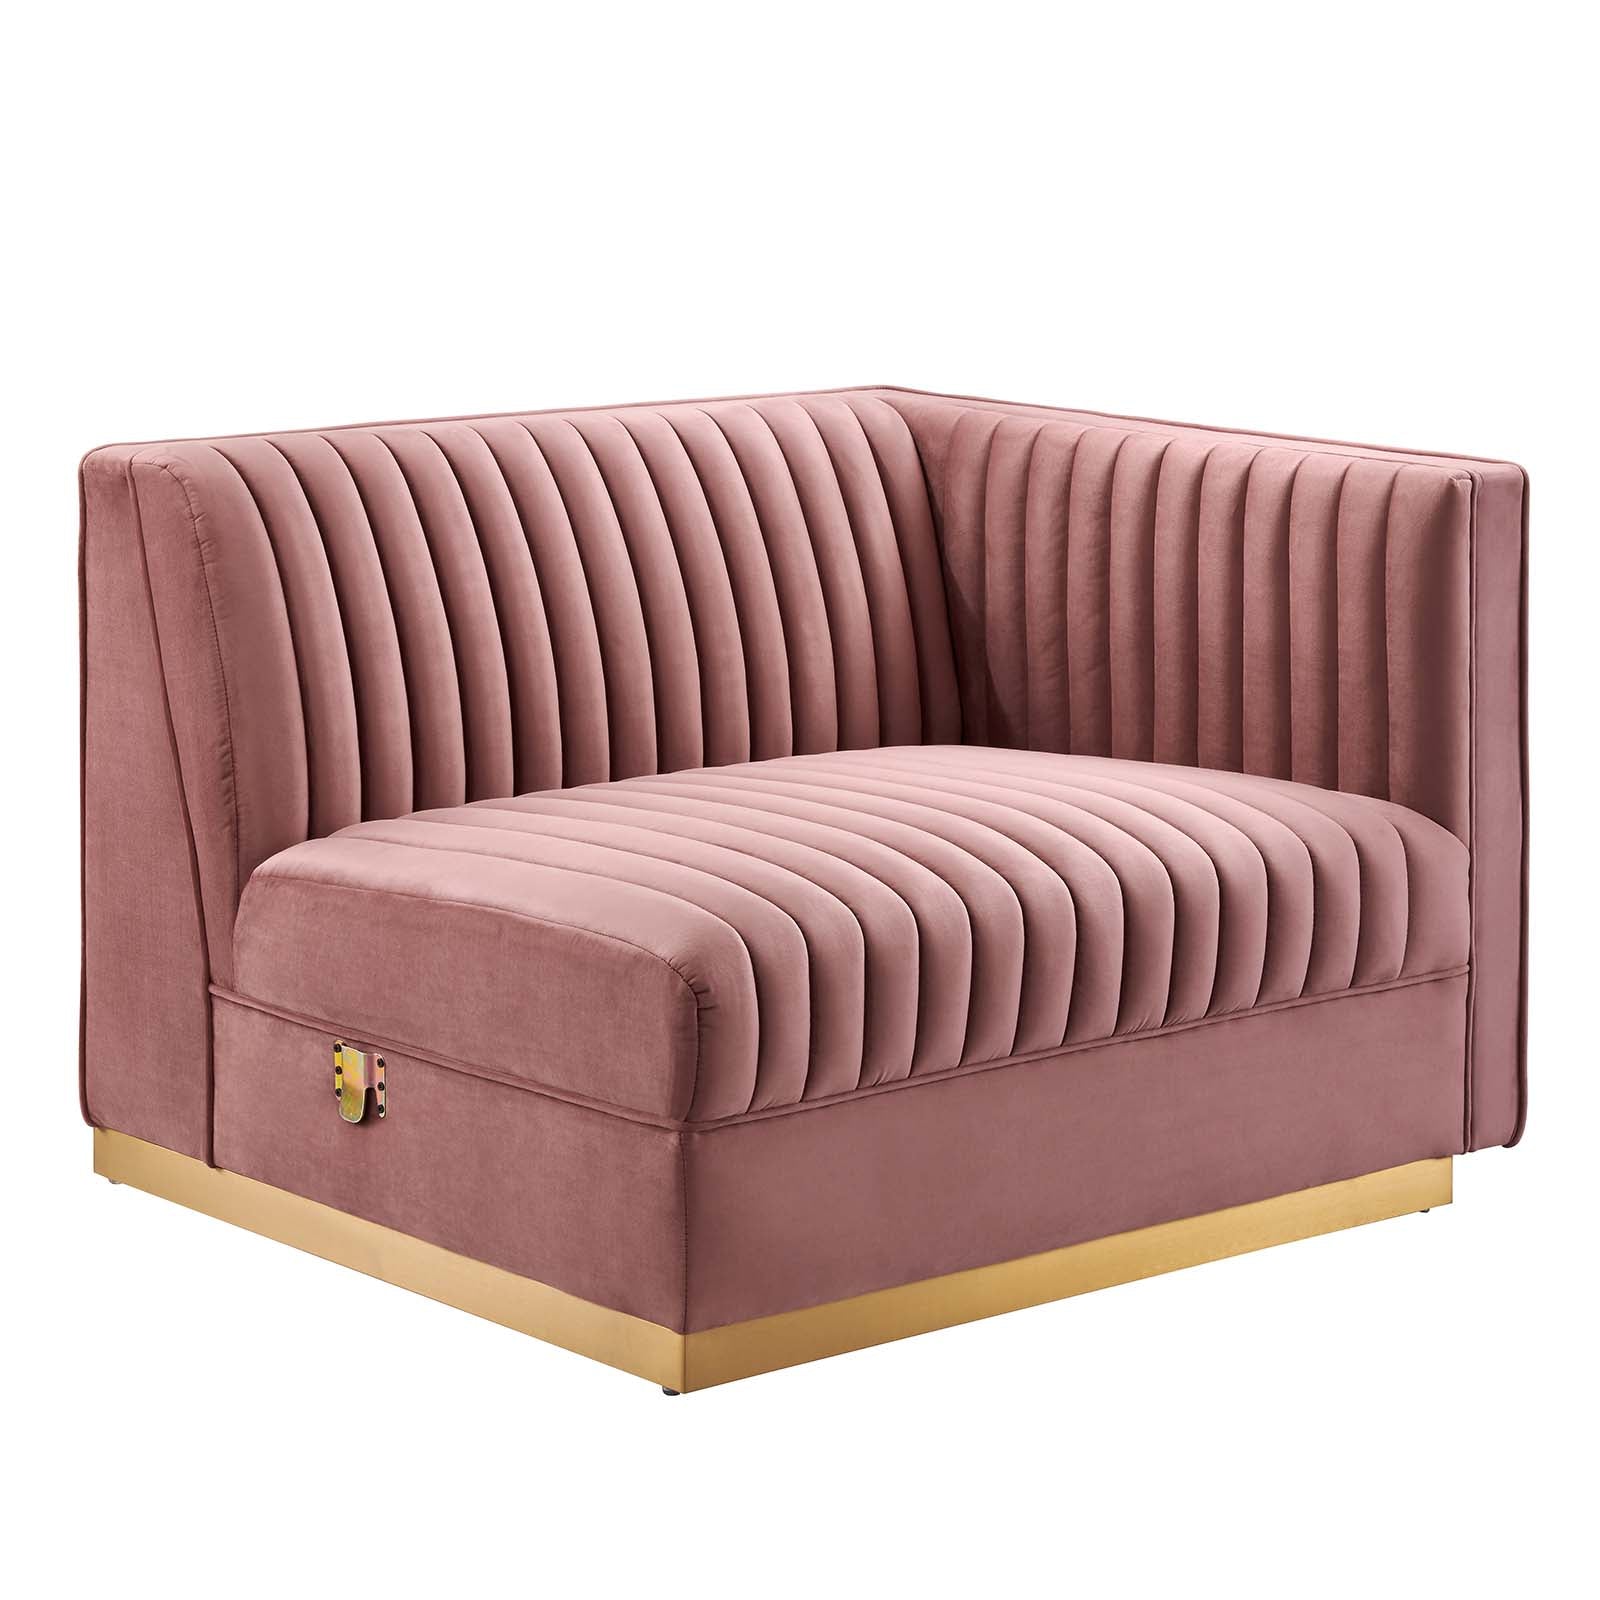 Modway Sectional Sofas - Sanguine Channel Tufted Performance Velvet 4 Piece Left-Facing Modular Sectional Sofa Dusty Rose